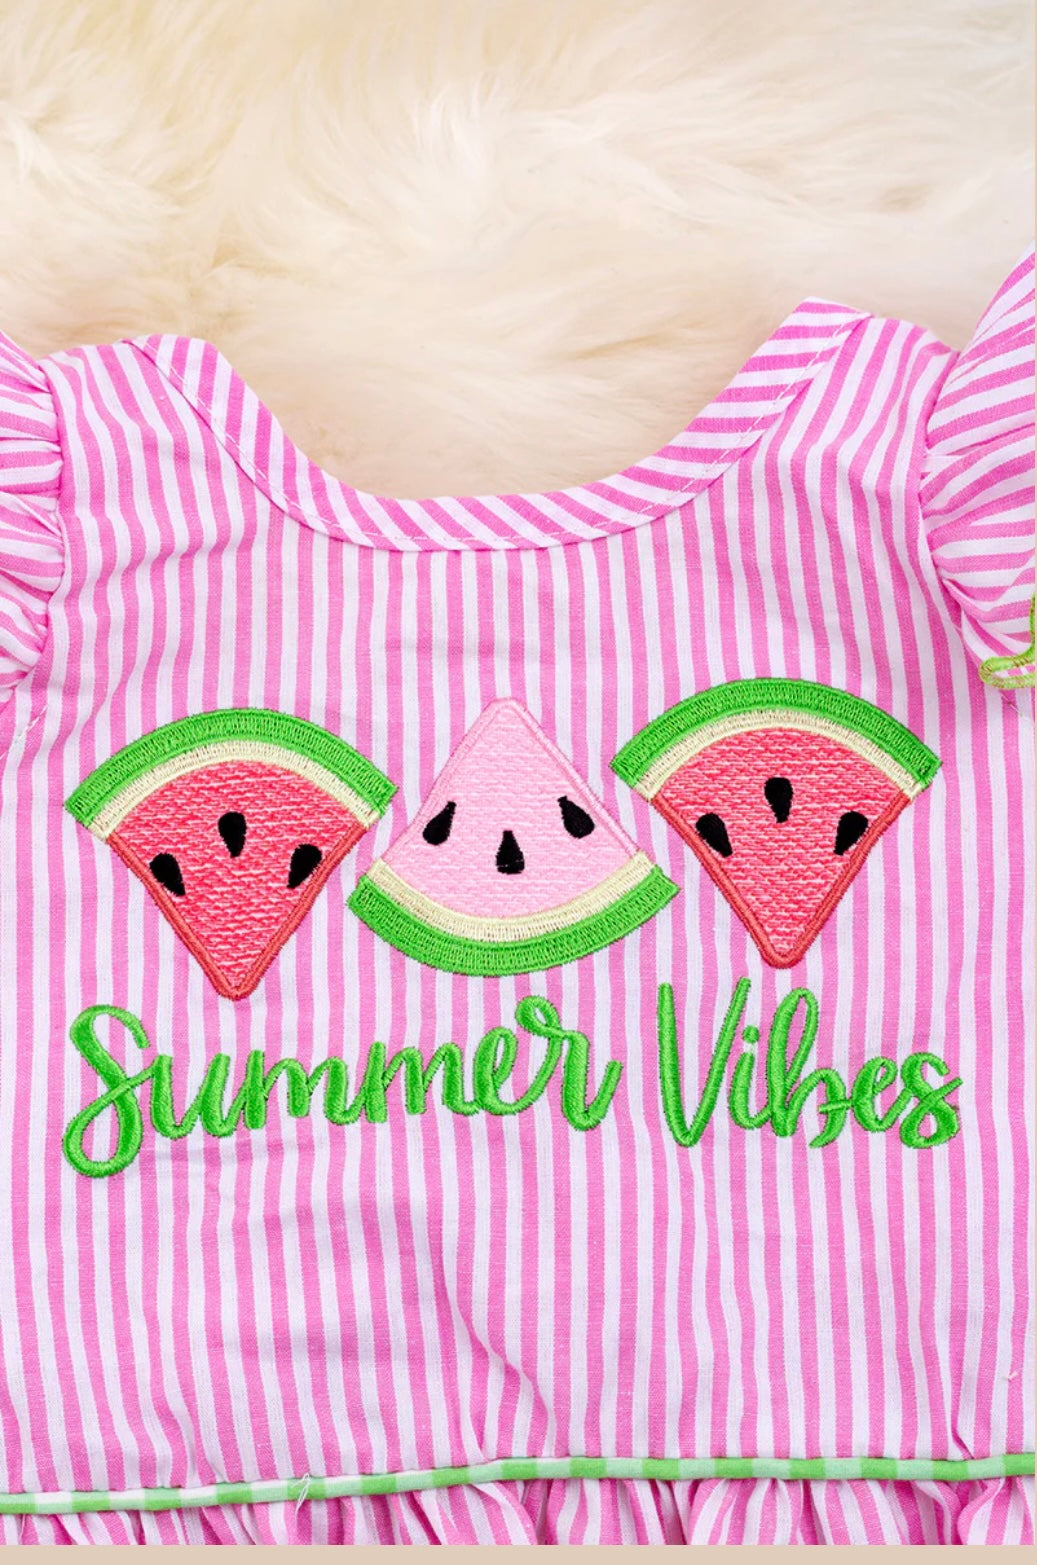 Summer Vibes Watermelon Bloomer Outfit